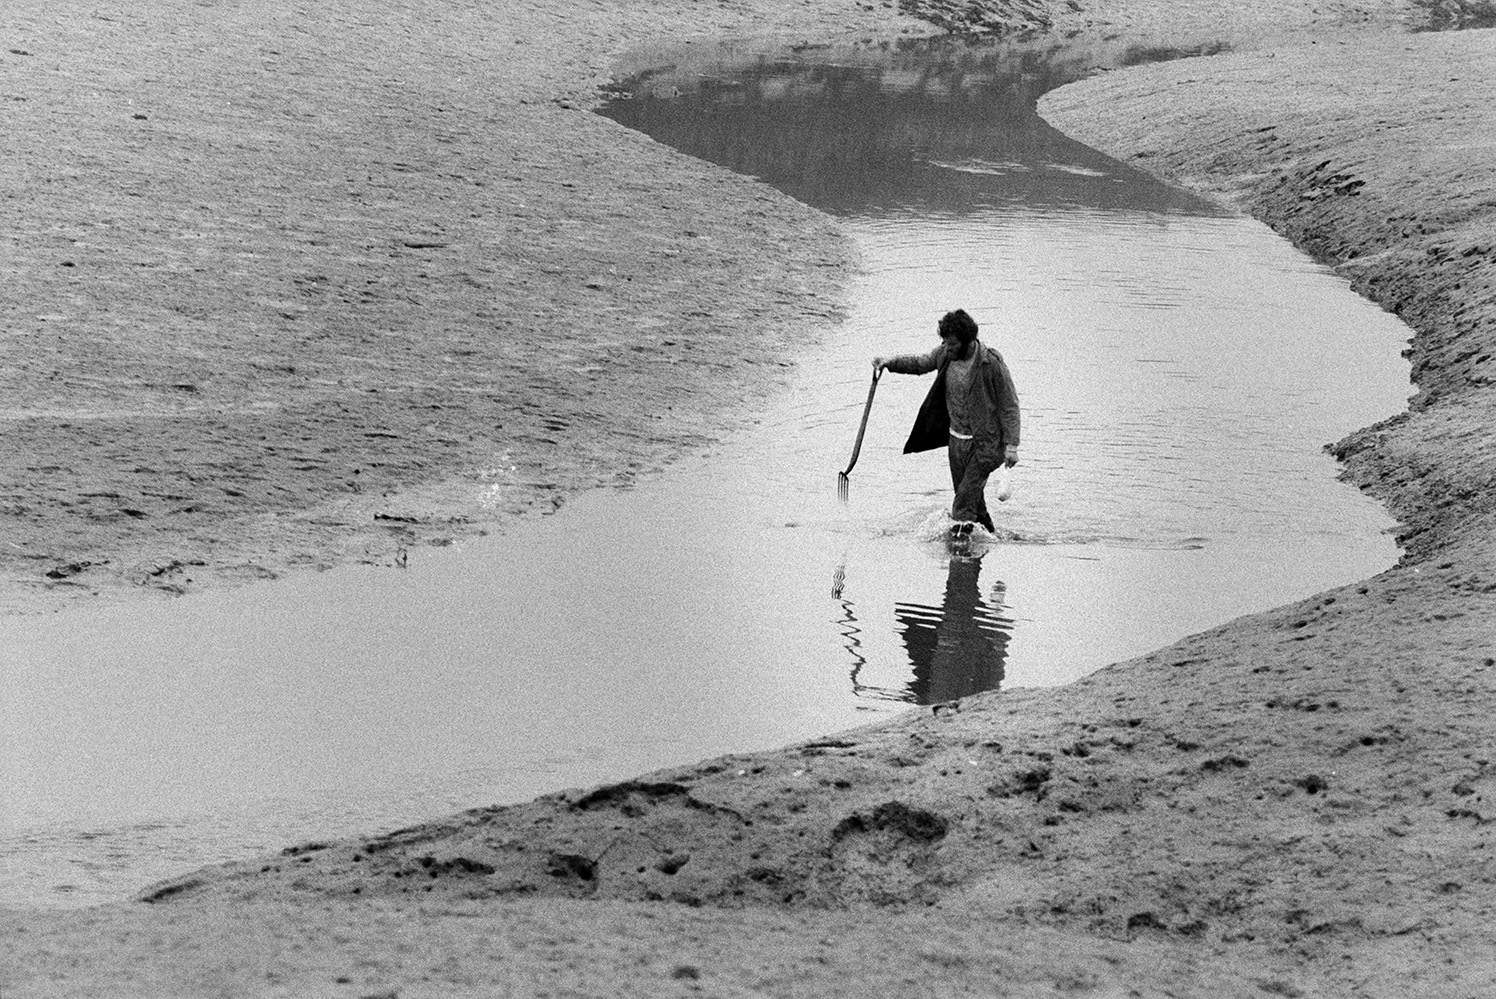 A man walking through a river estuary holding a fork at Braunton. The mud flats can be seen either side of the river.